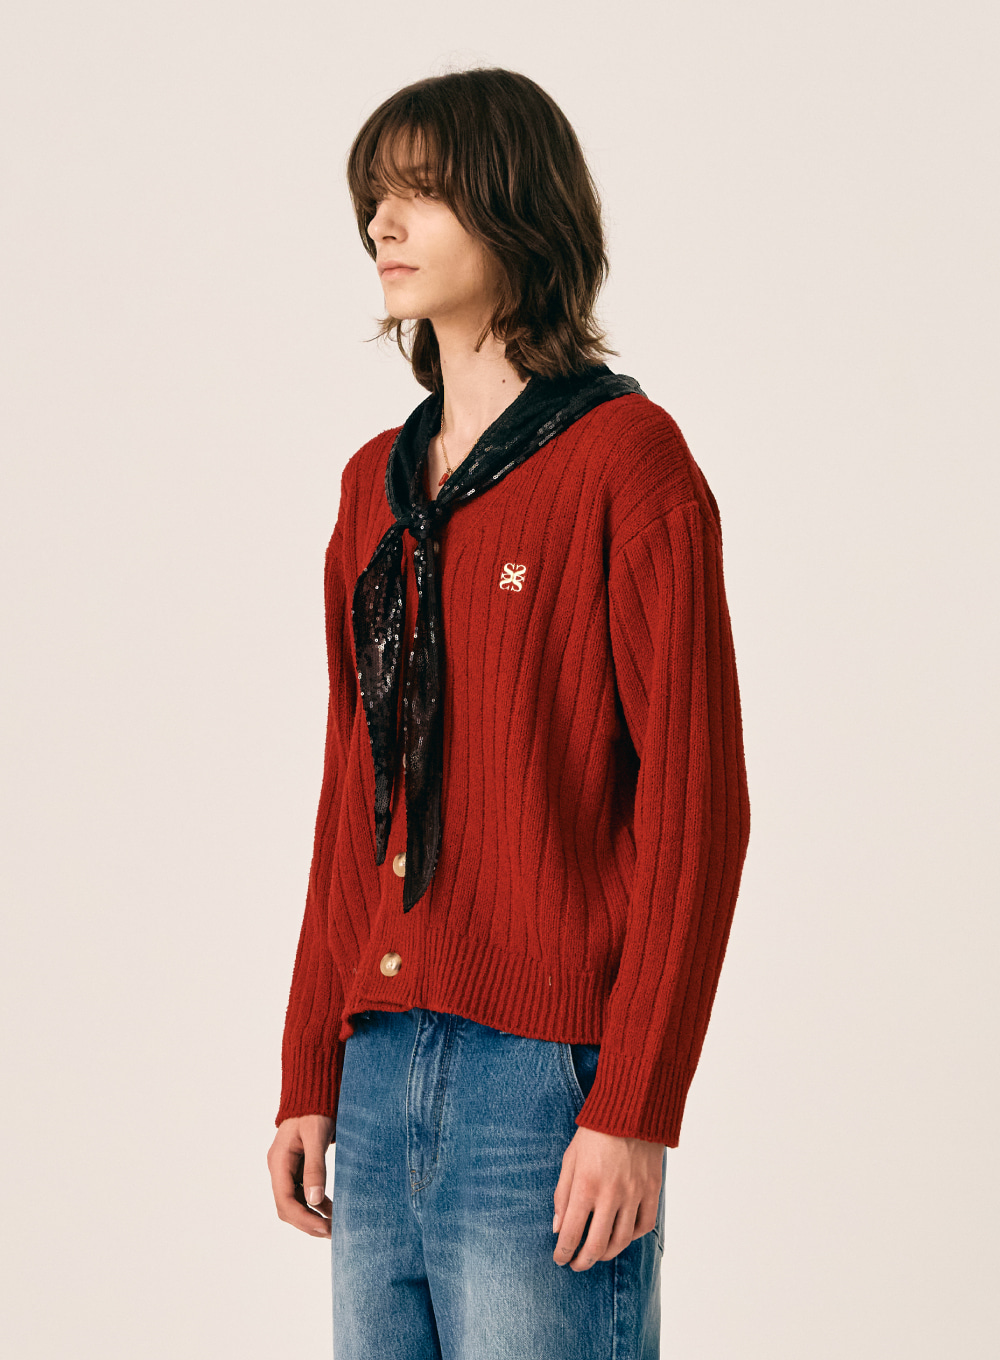 Faro Over Size Boucle Cardigan - Burgundy Red